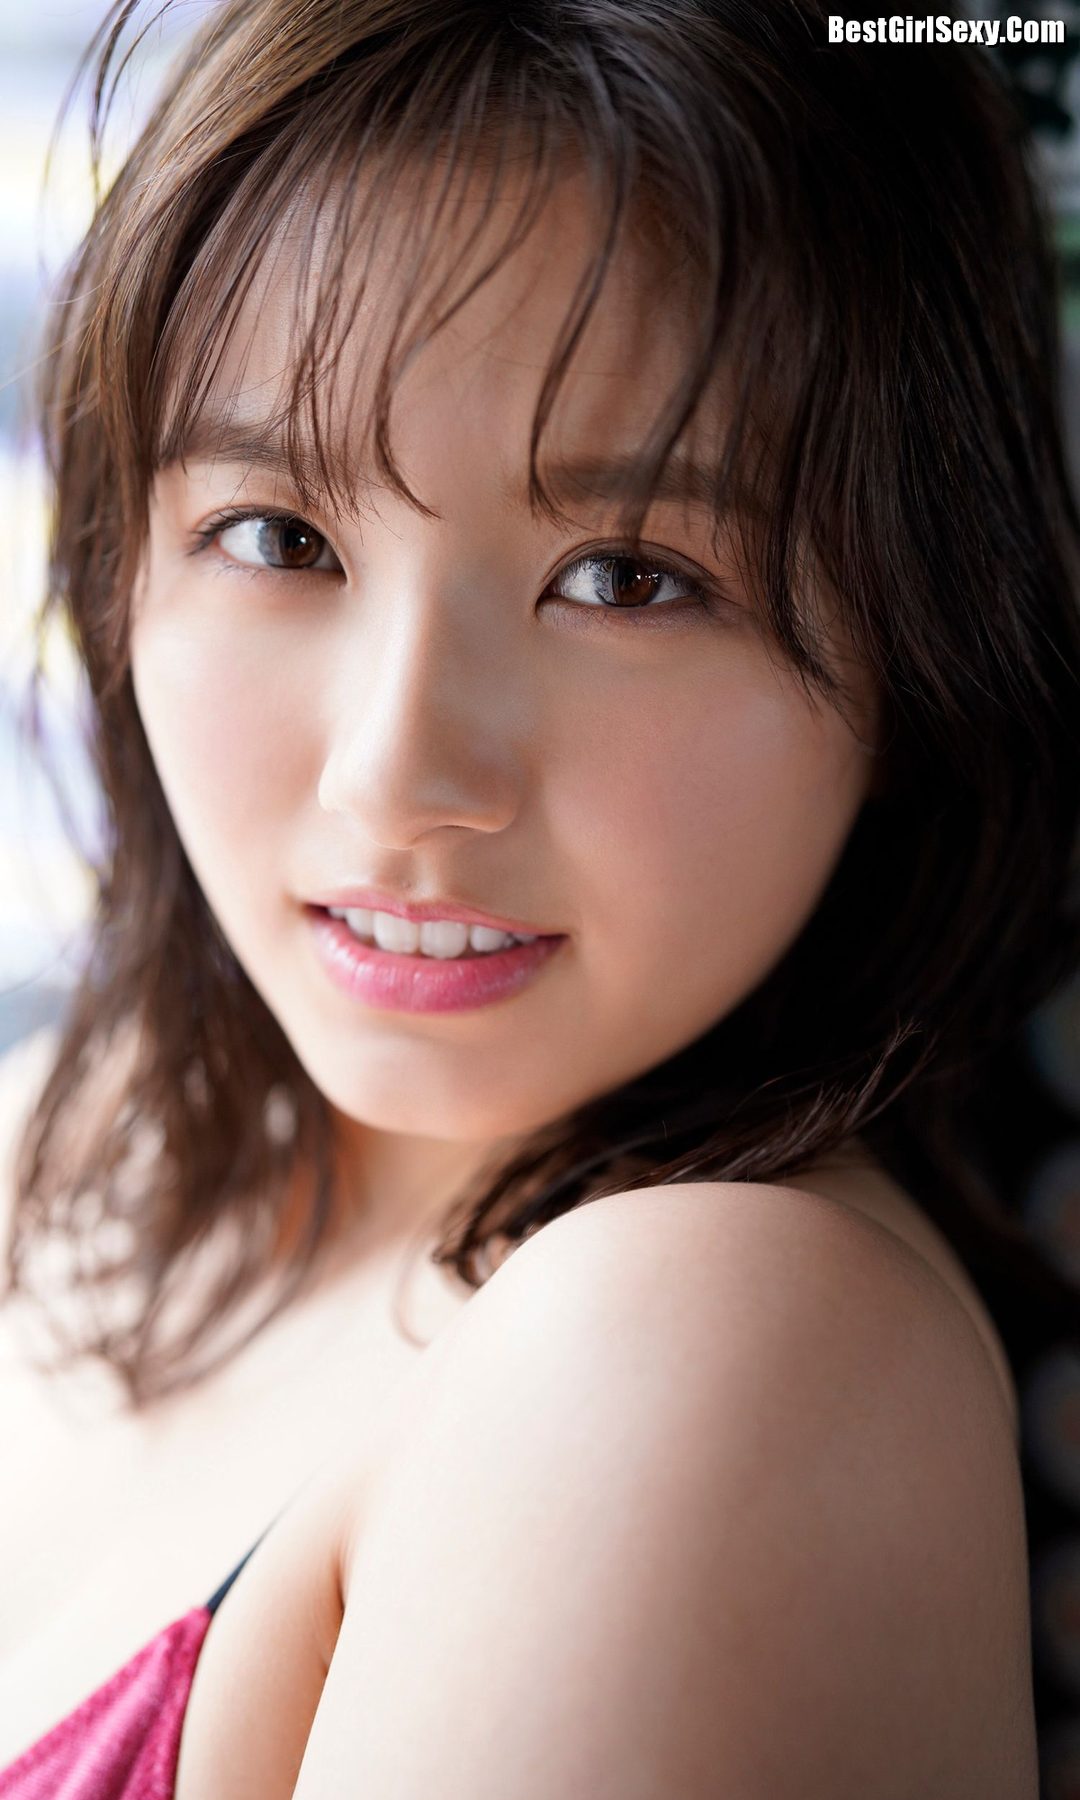 Digital Limited Owada Nana 大和田南那 The Other Side Of That Door 0041 2174732518.jpg